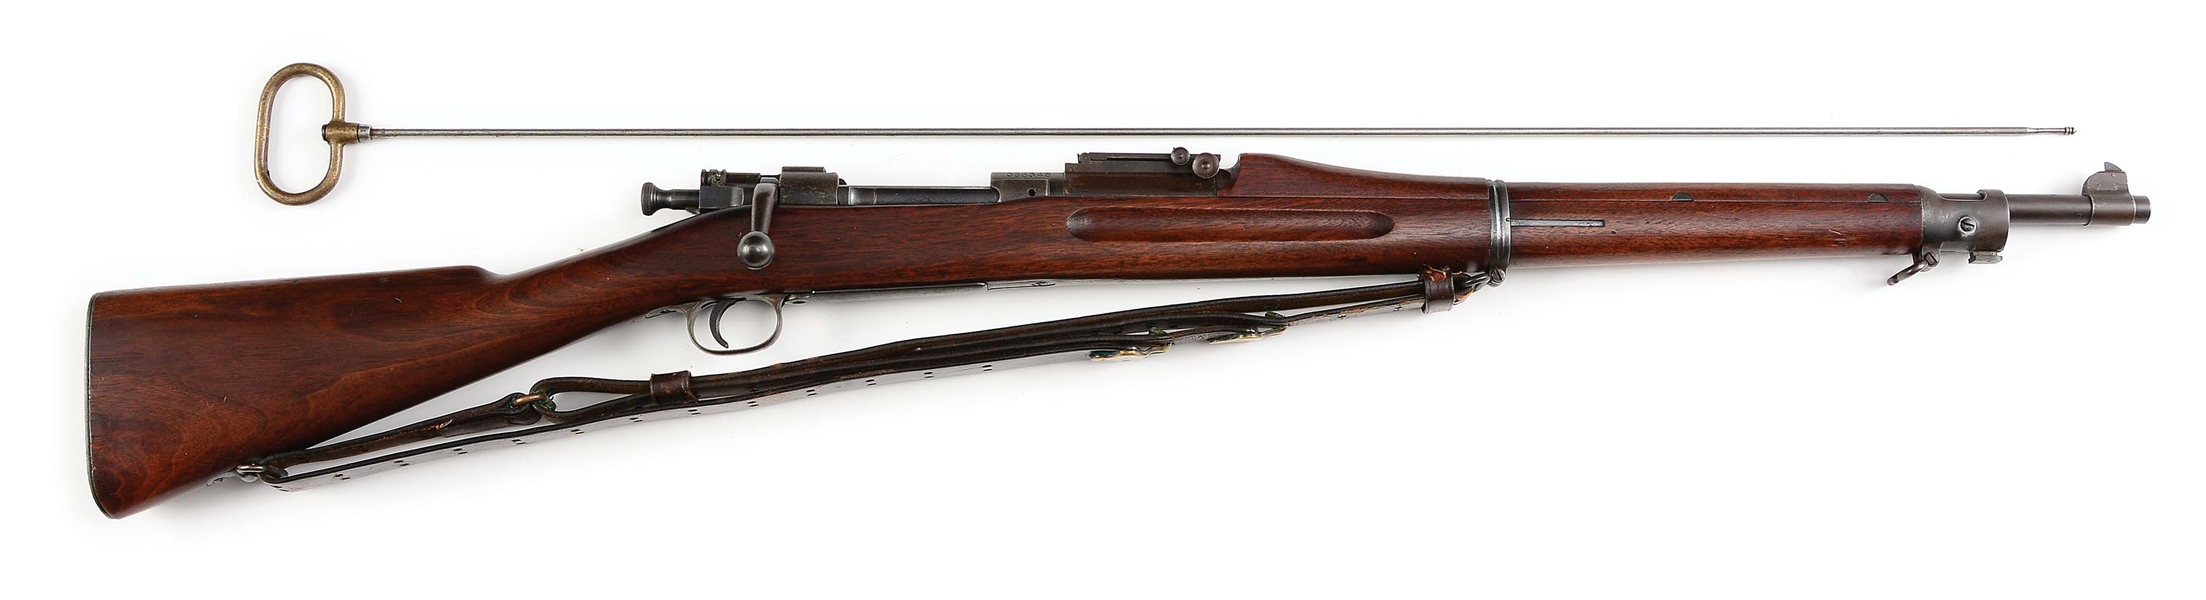 (C) RARE HOFFER-THOMPSON .22 GALLERY PRACTICE SPRINGFIELD RIFLE WITH 25 HOFFER-THOMPSON ADAPTERS.